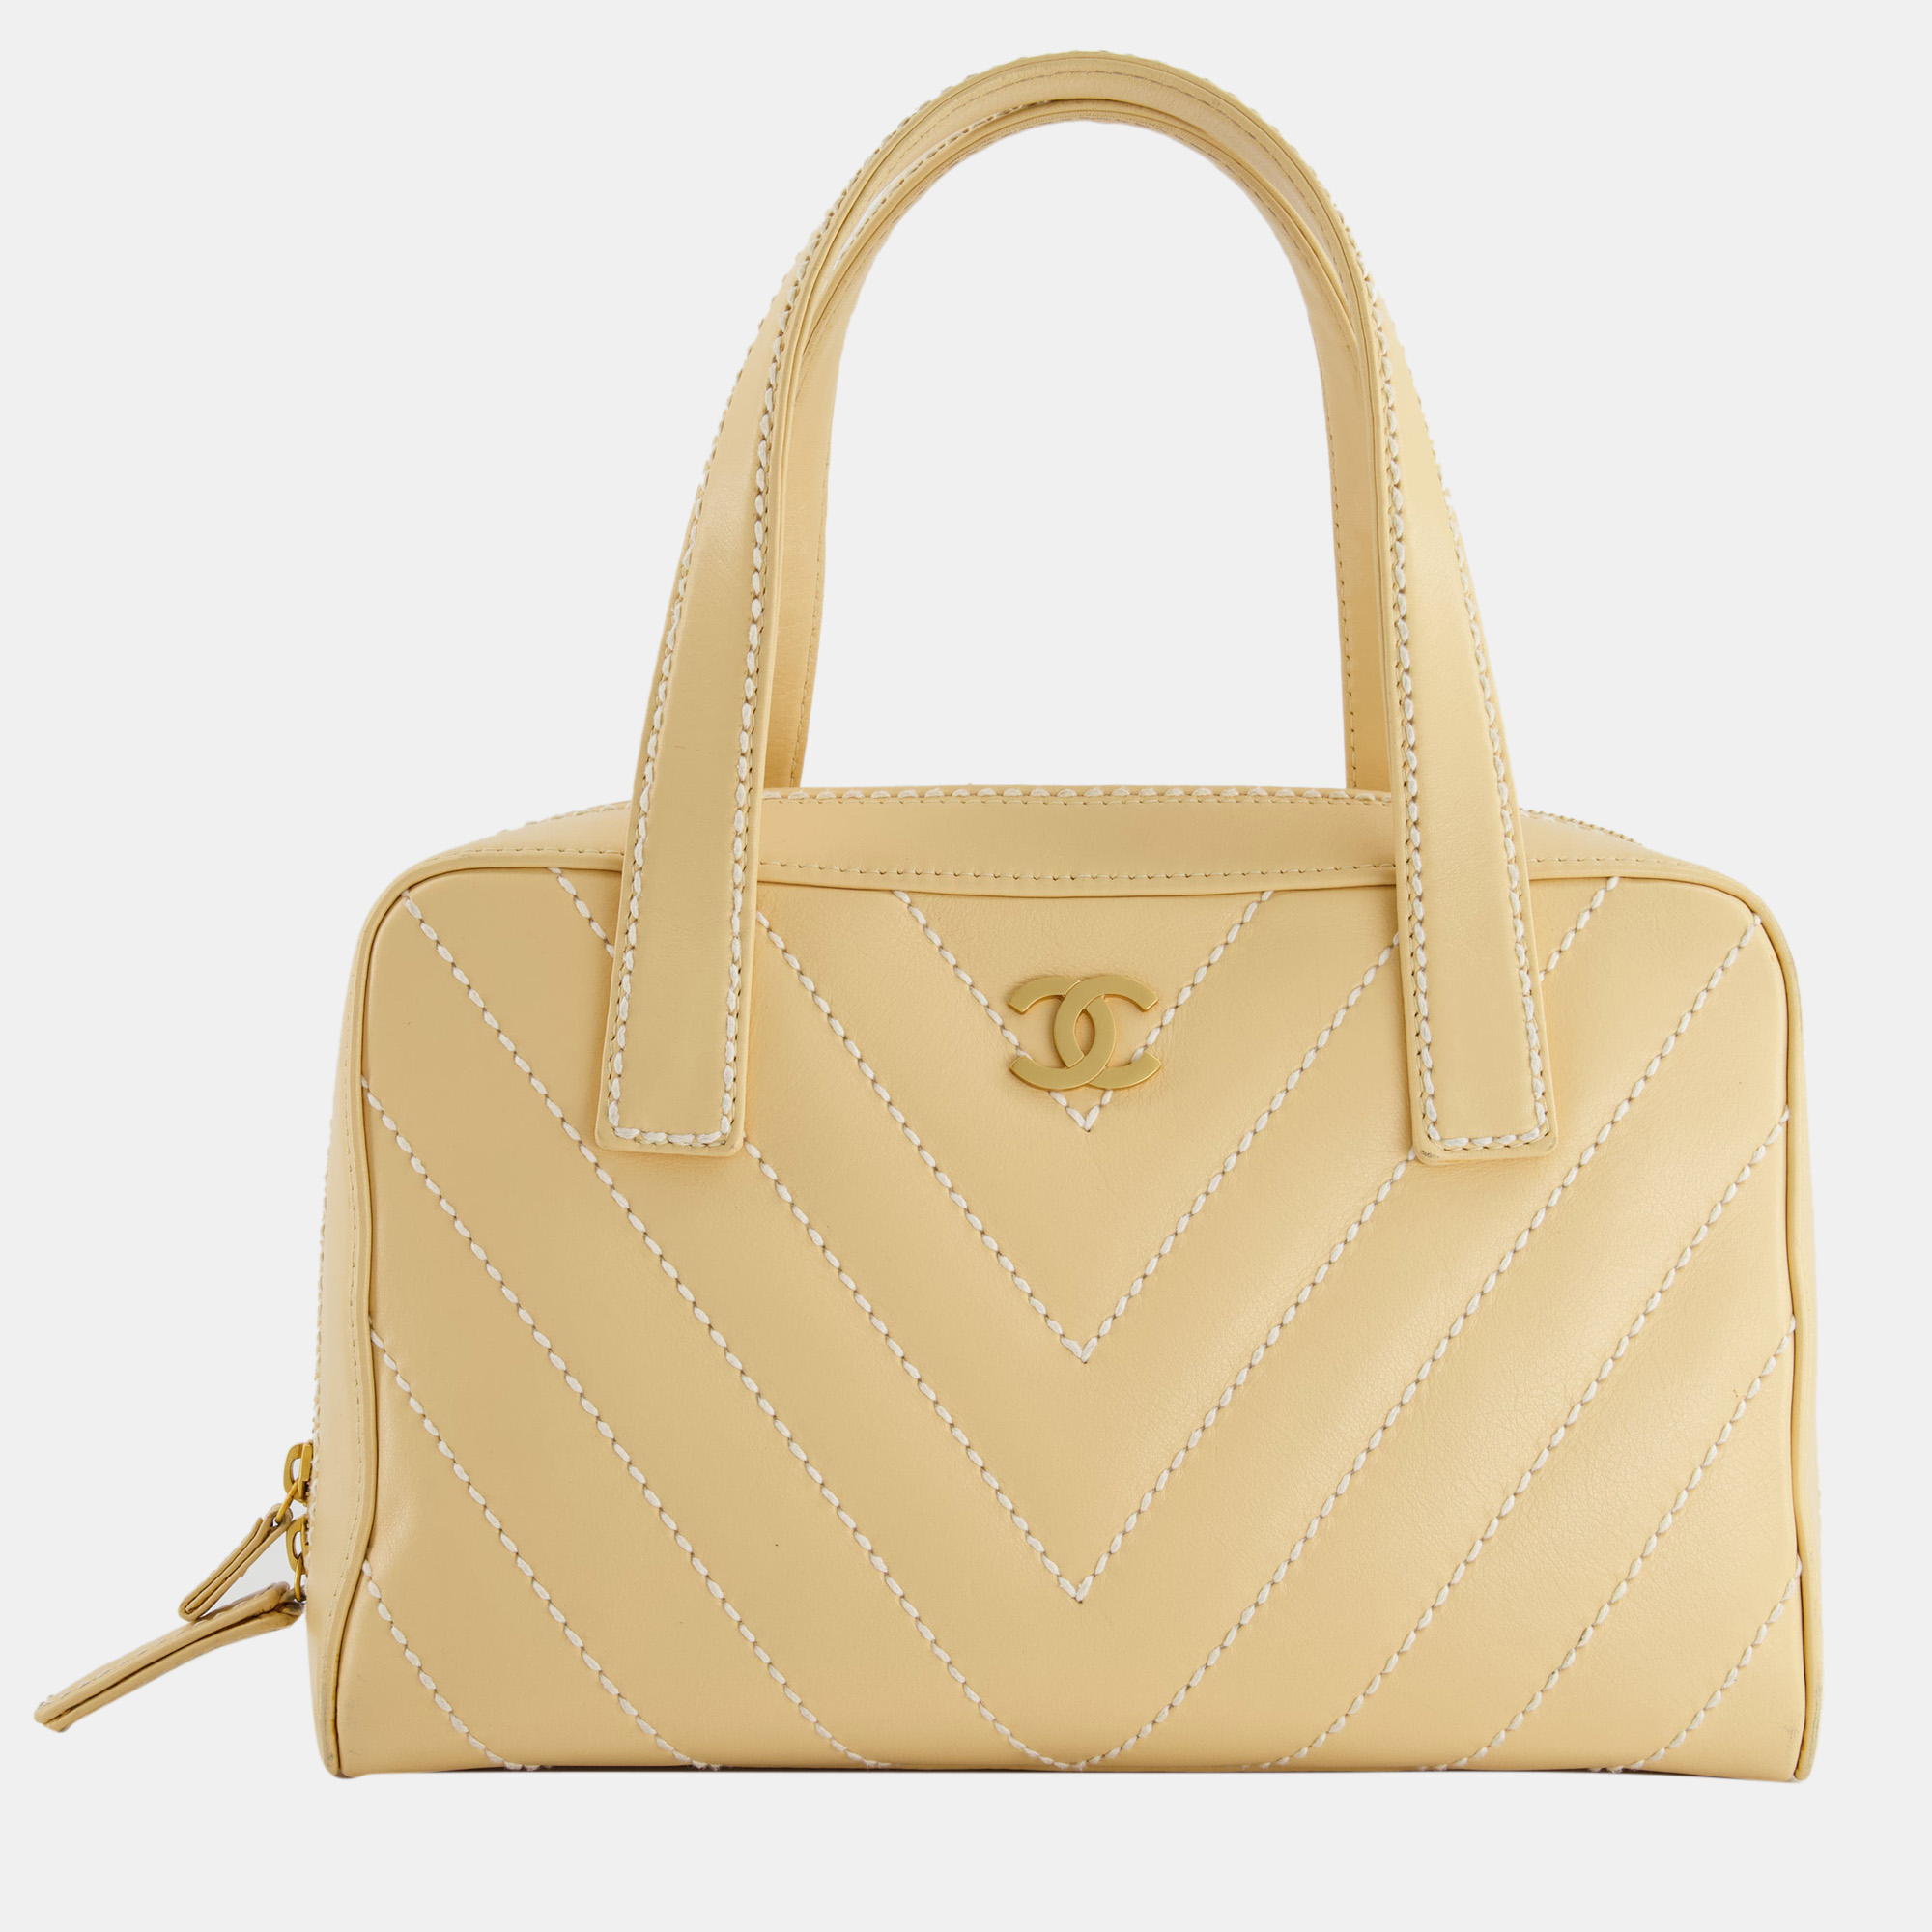 Chanel pastel yellow bowling bag in calfskin leather with brushed gold hardware